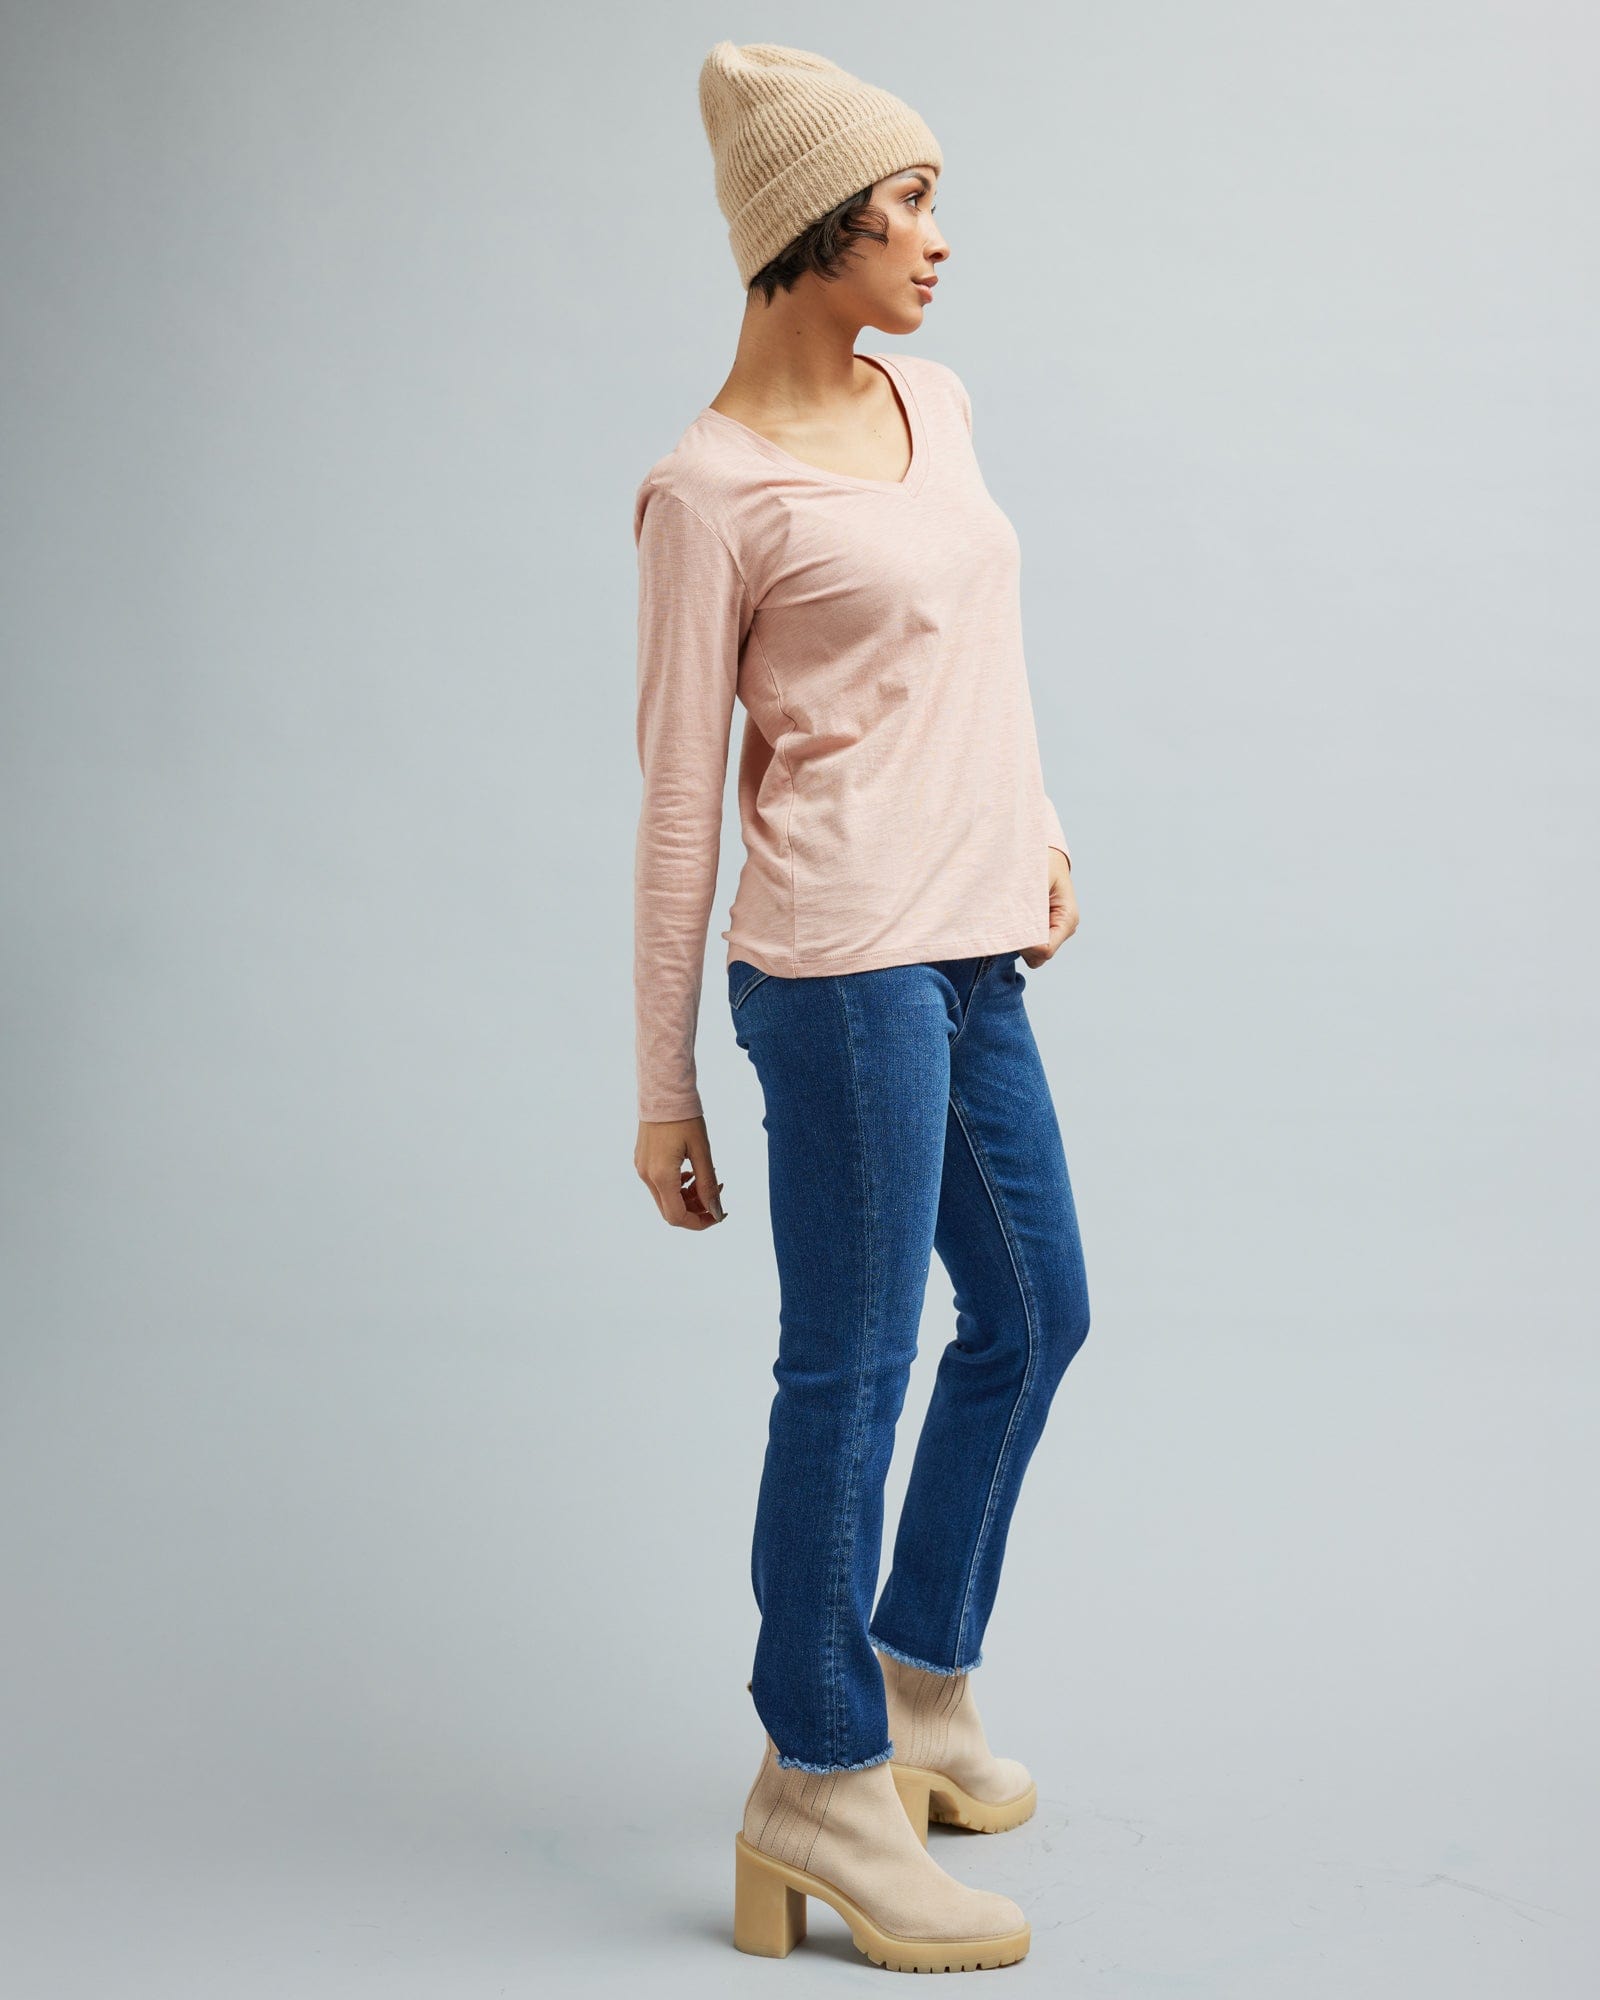 Woman in a long sleeve, pink v-neck t-shirt